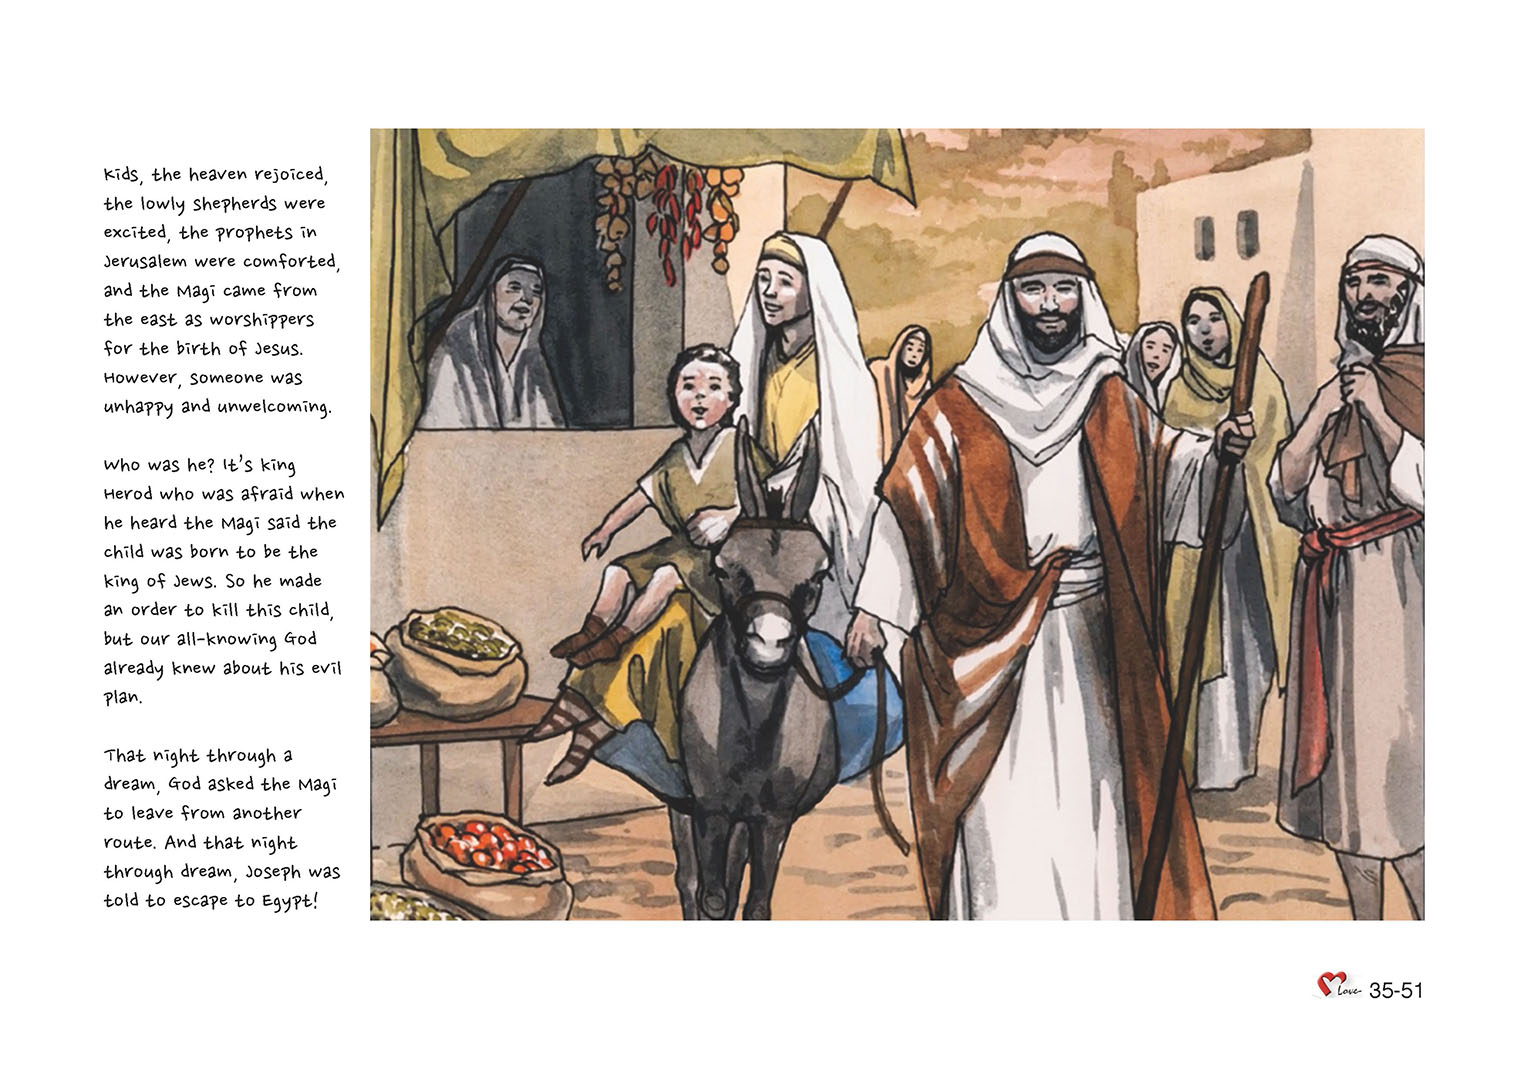 Chapter 35 - Lesson 102 - The birth of Jesus